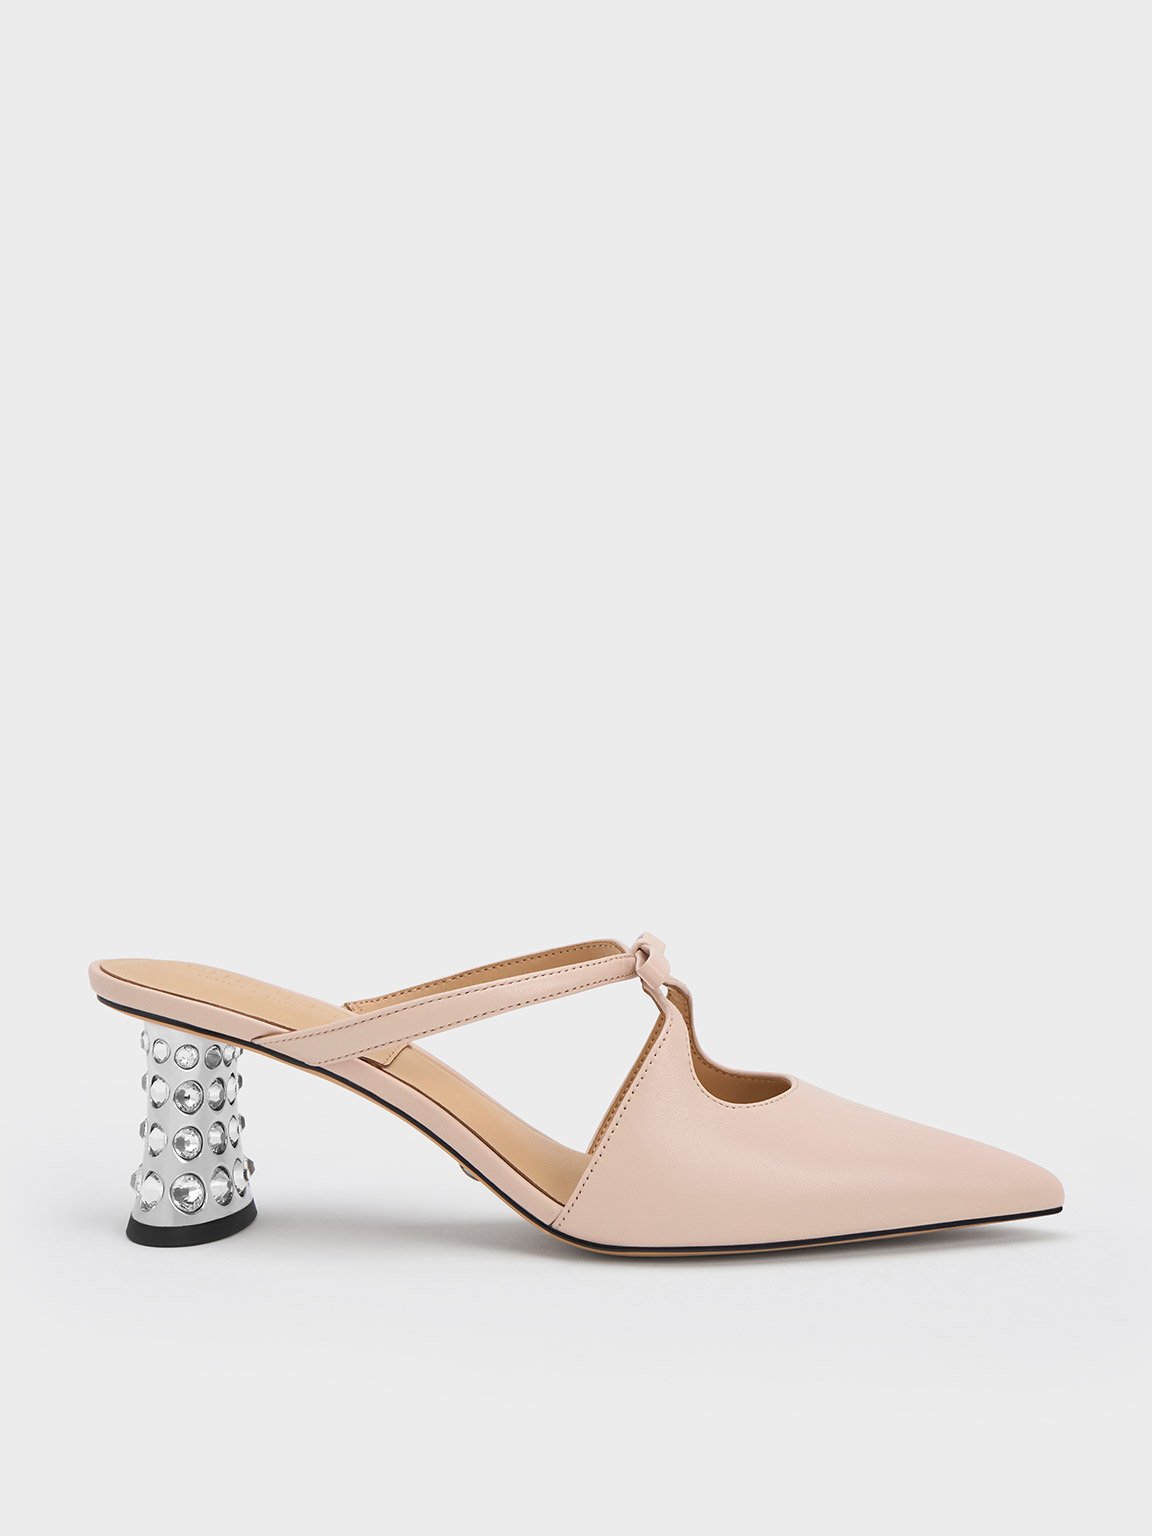 Nude Bow Crossover Gem-Embellished Mules - CHARLES & KEITH US